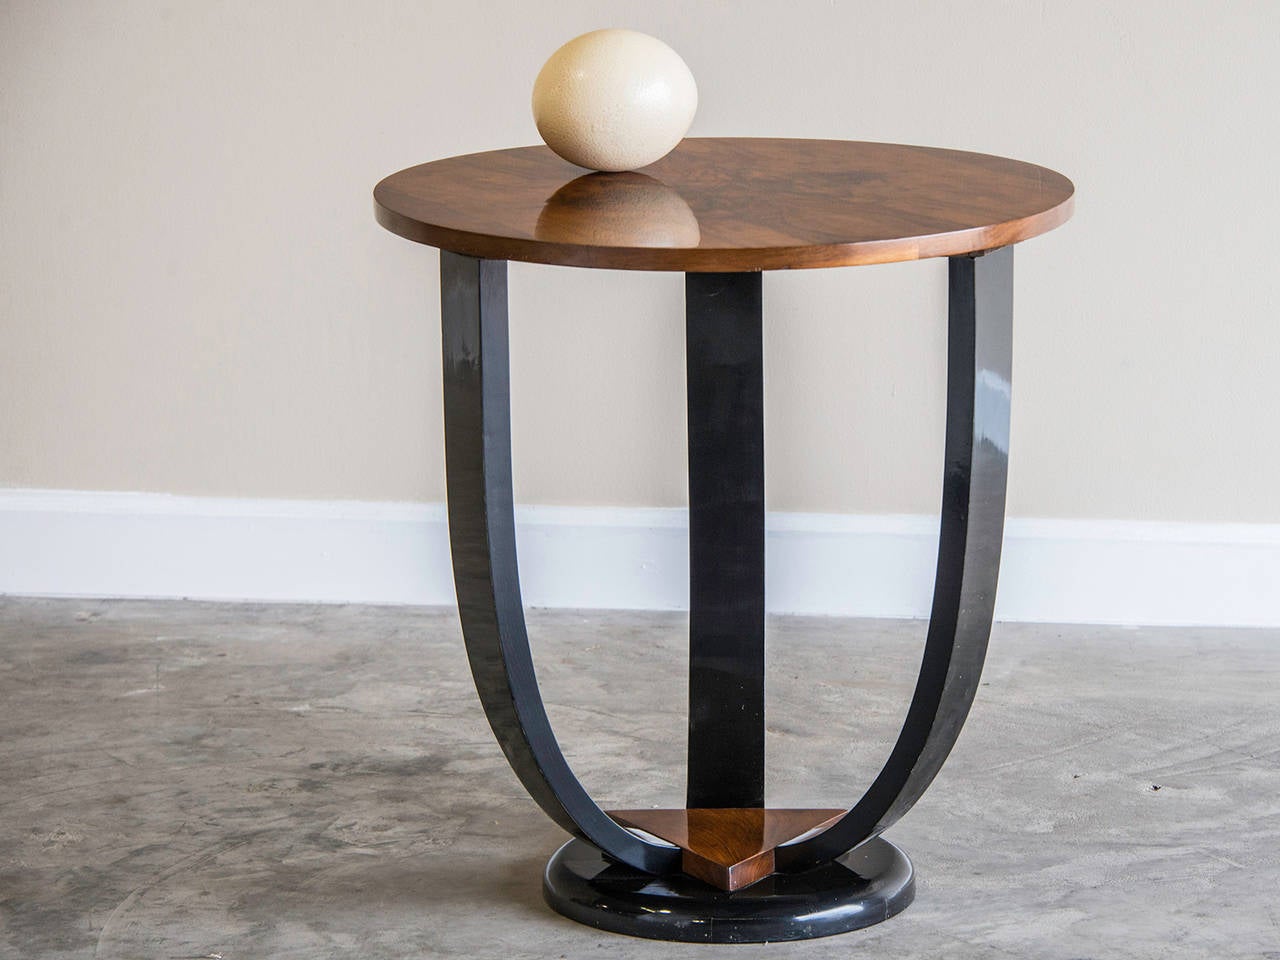 Art Deco period burl walnut and ebonized timber circular table from France, circa 1930. The powerful visual impact of the bookmatched walnut on the top surface of this table is matched by the sweep of the three ebonized legs. At the base of the